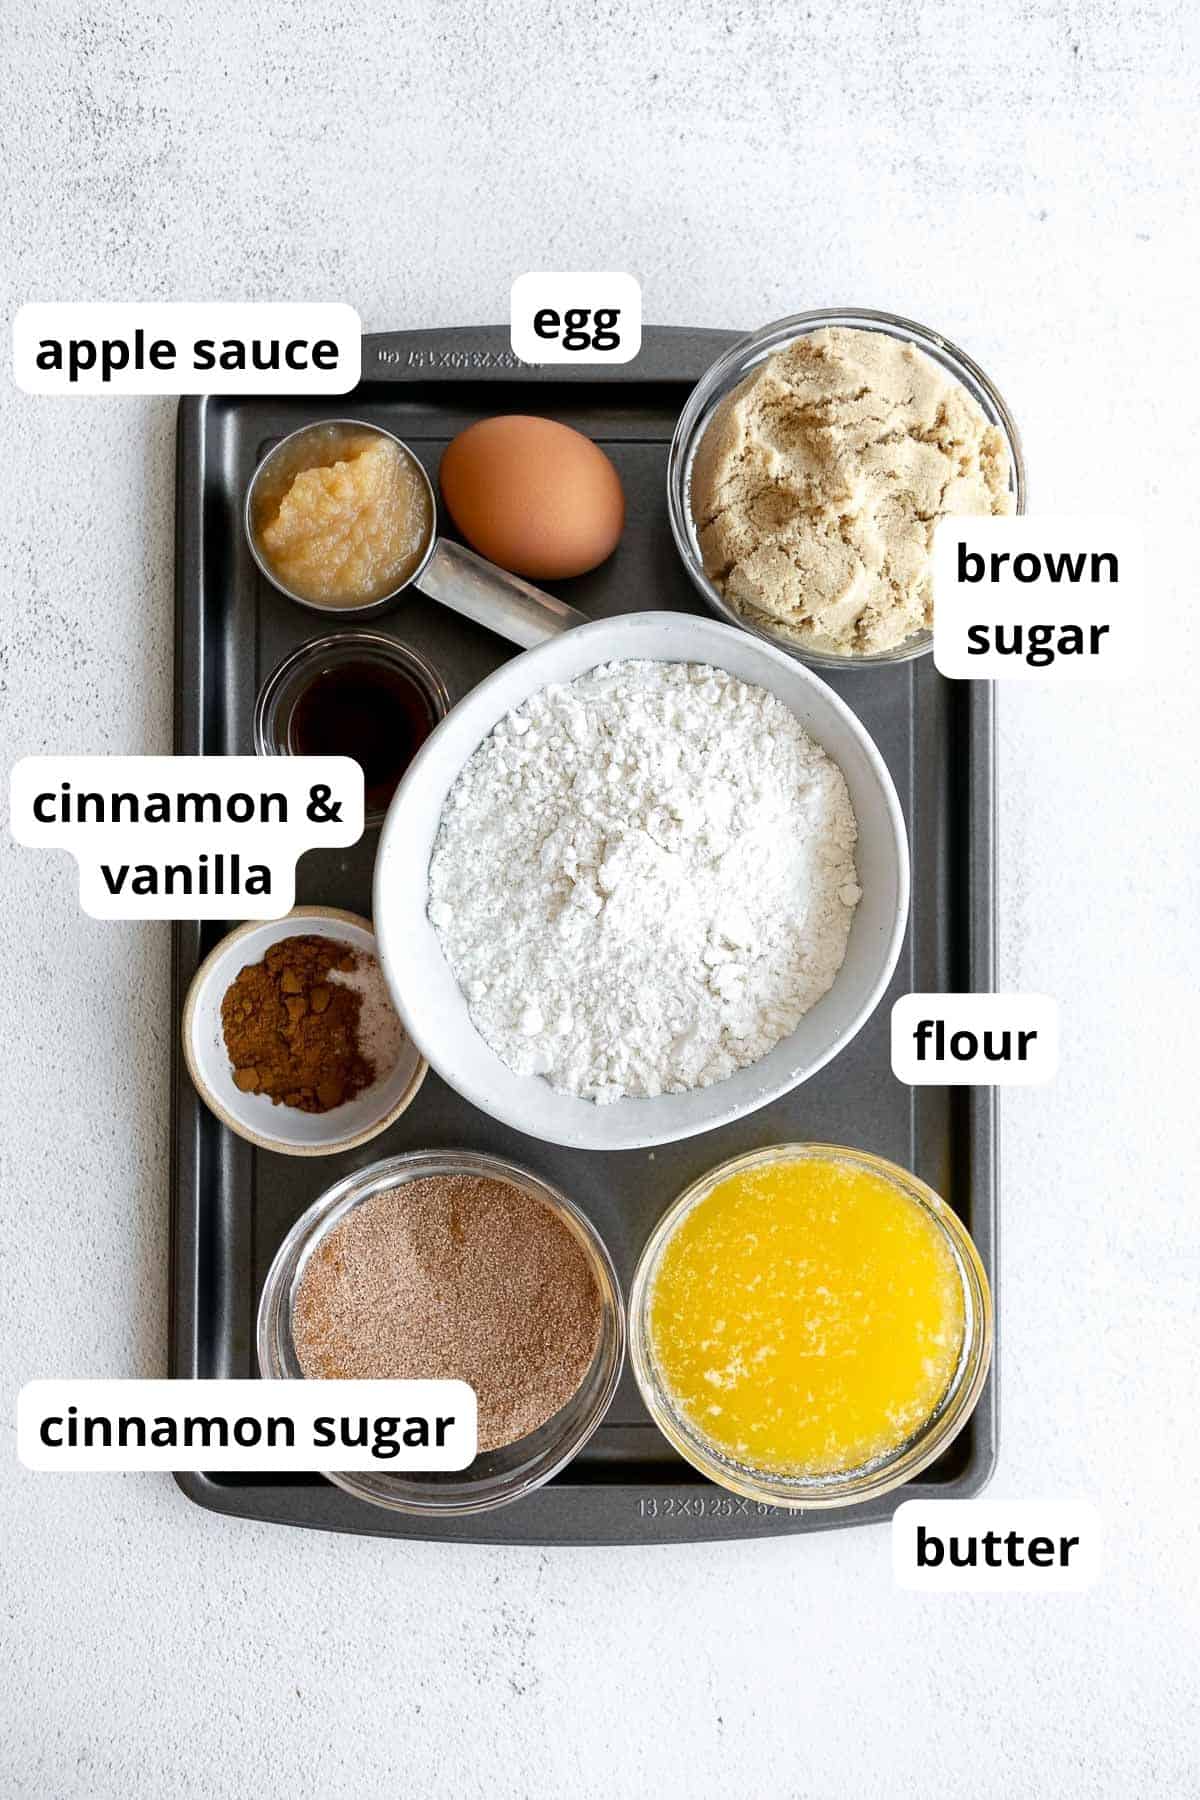 ingredients for the recipe arranged in bowls with labels